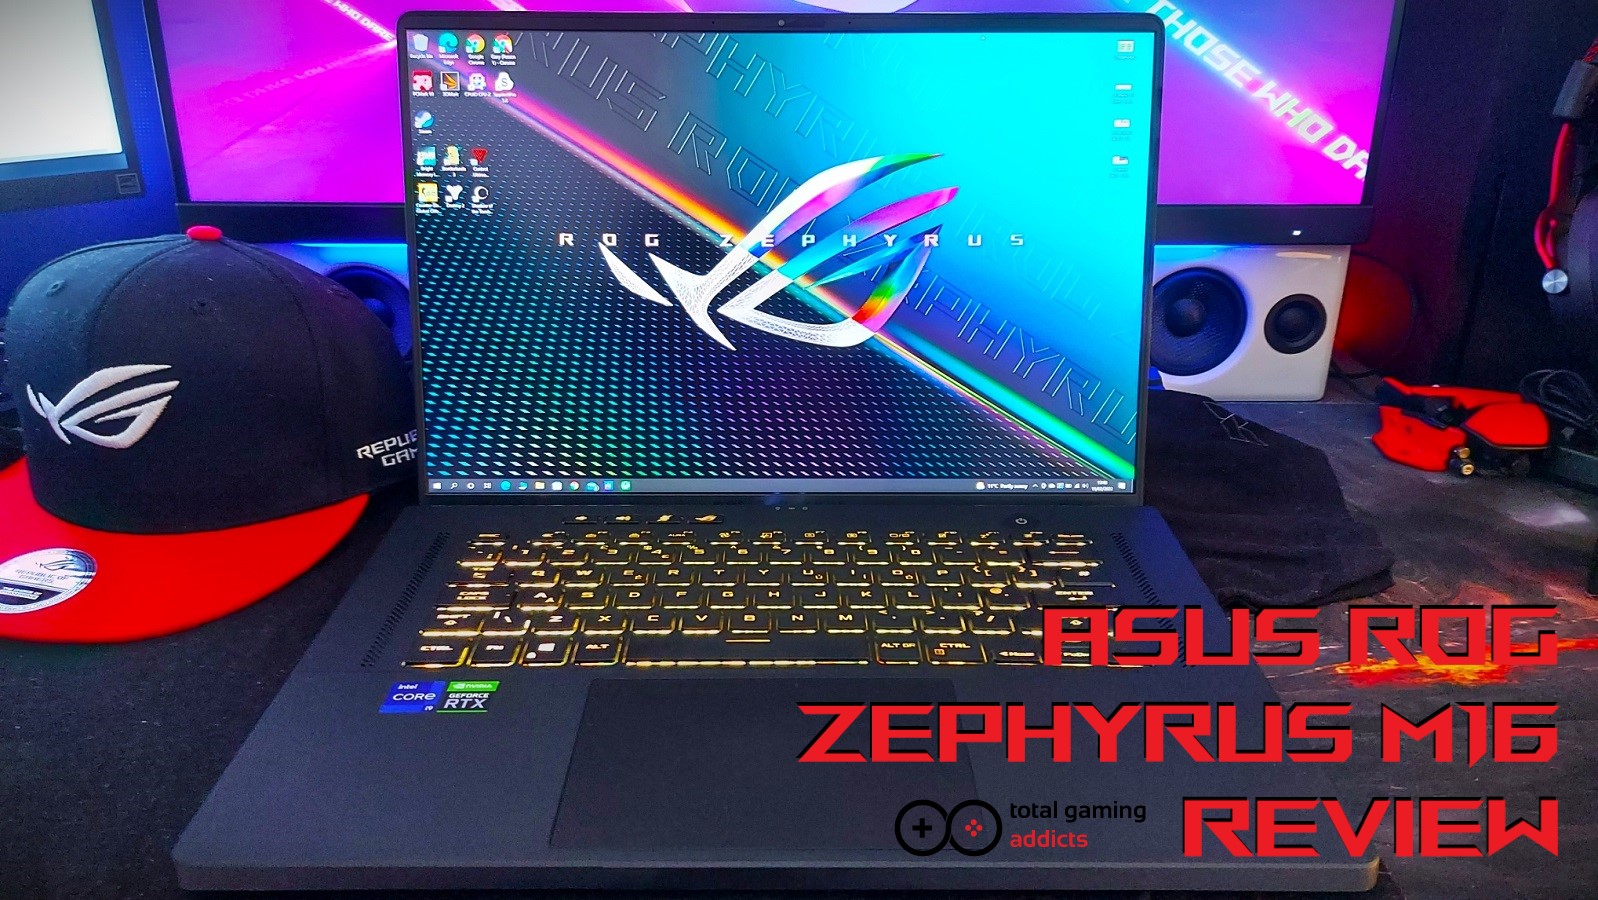 Asus ROG Zephyrus M16 review: Solid performance, gorgeous display